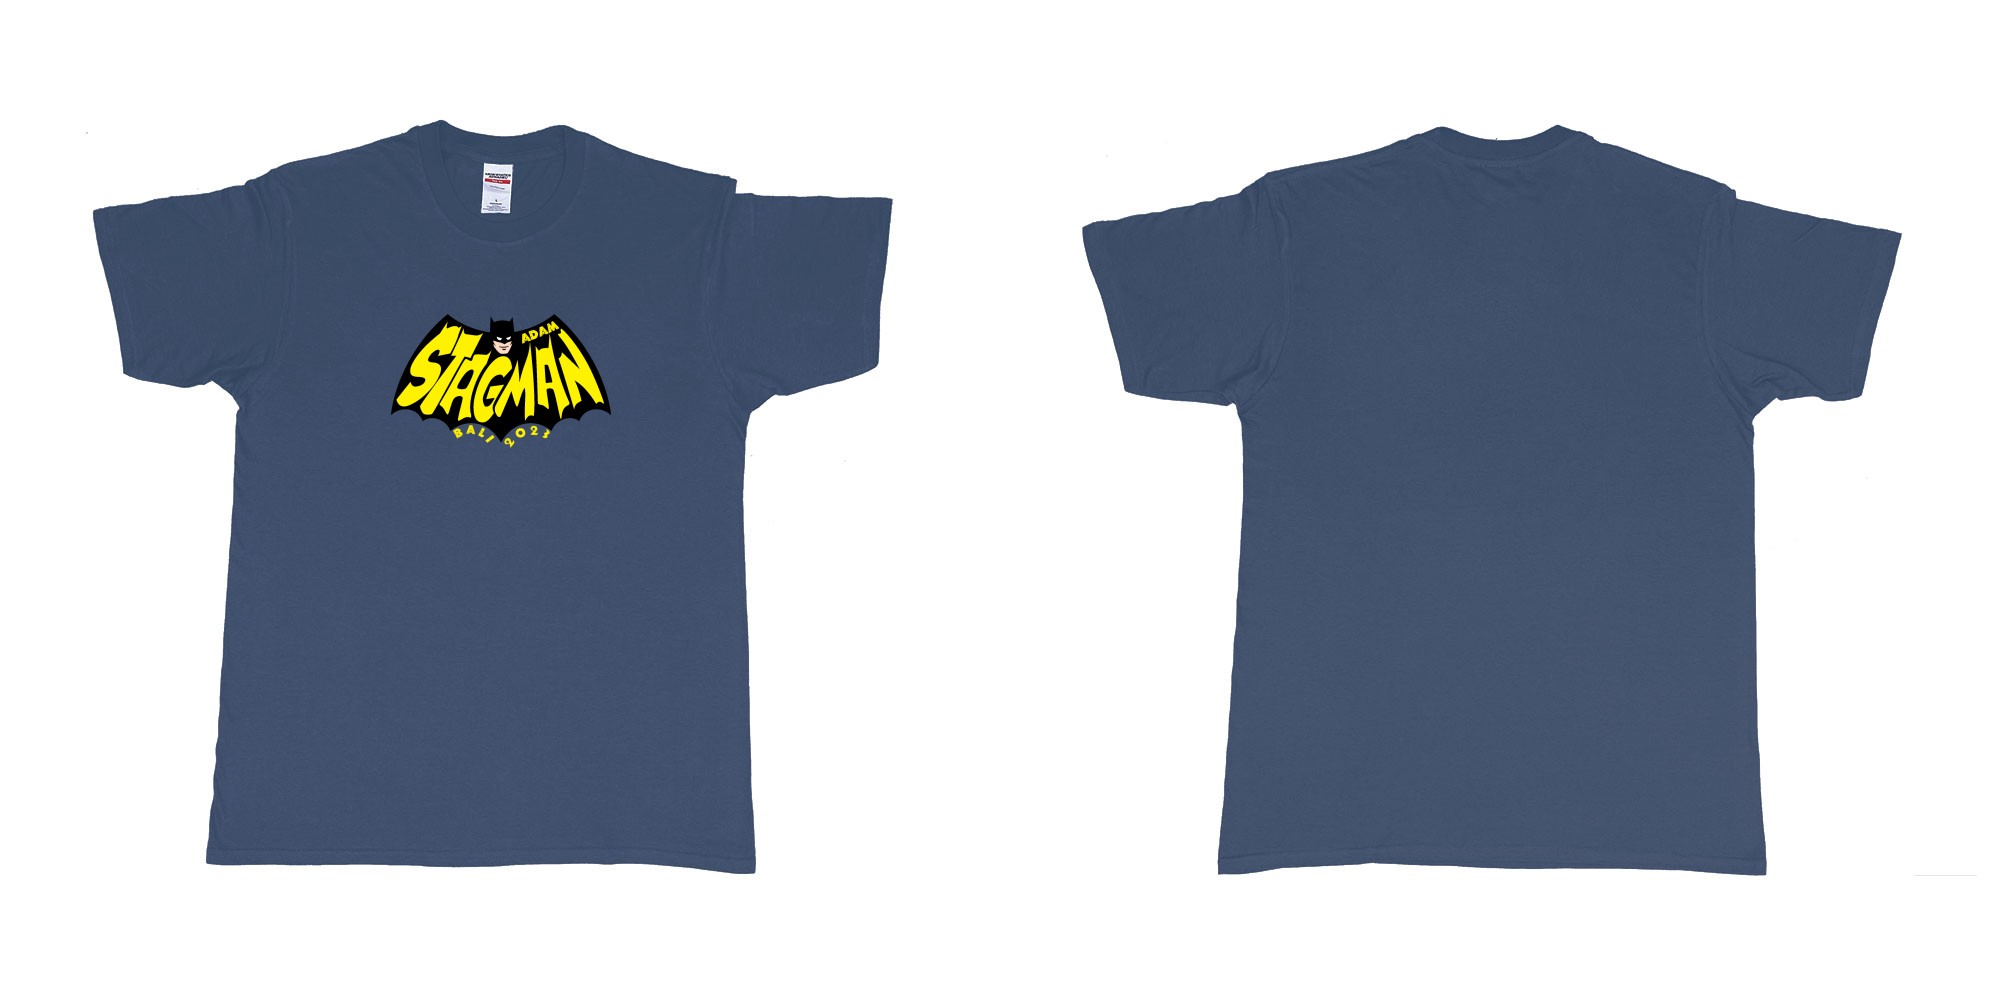 Custom tshirt design Batman StagMan Old School in fabric color navy choice your own text made in Bali by The Pirate Way